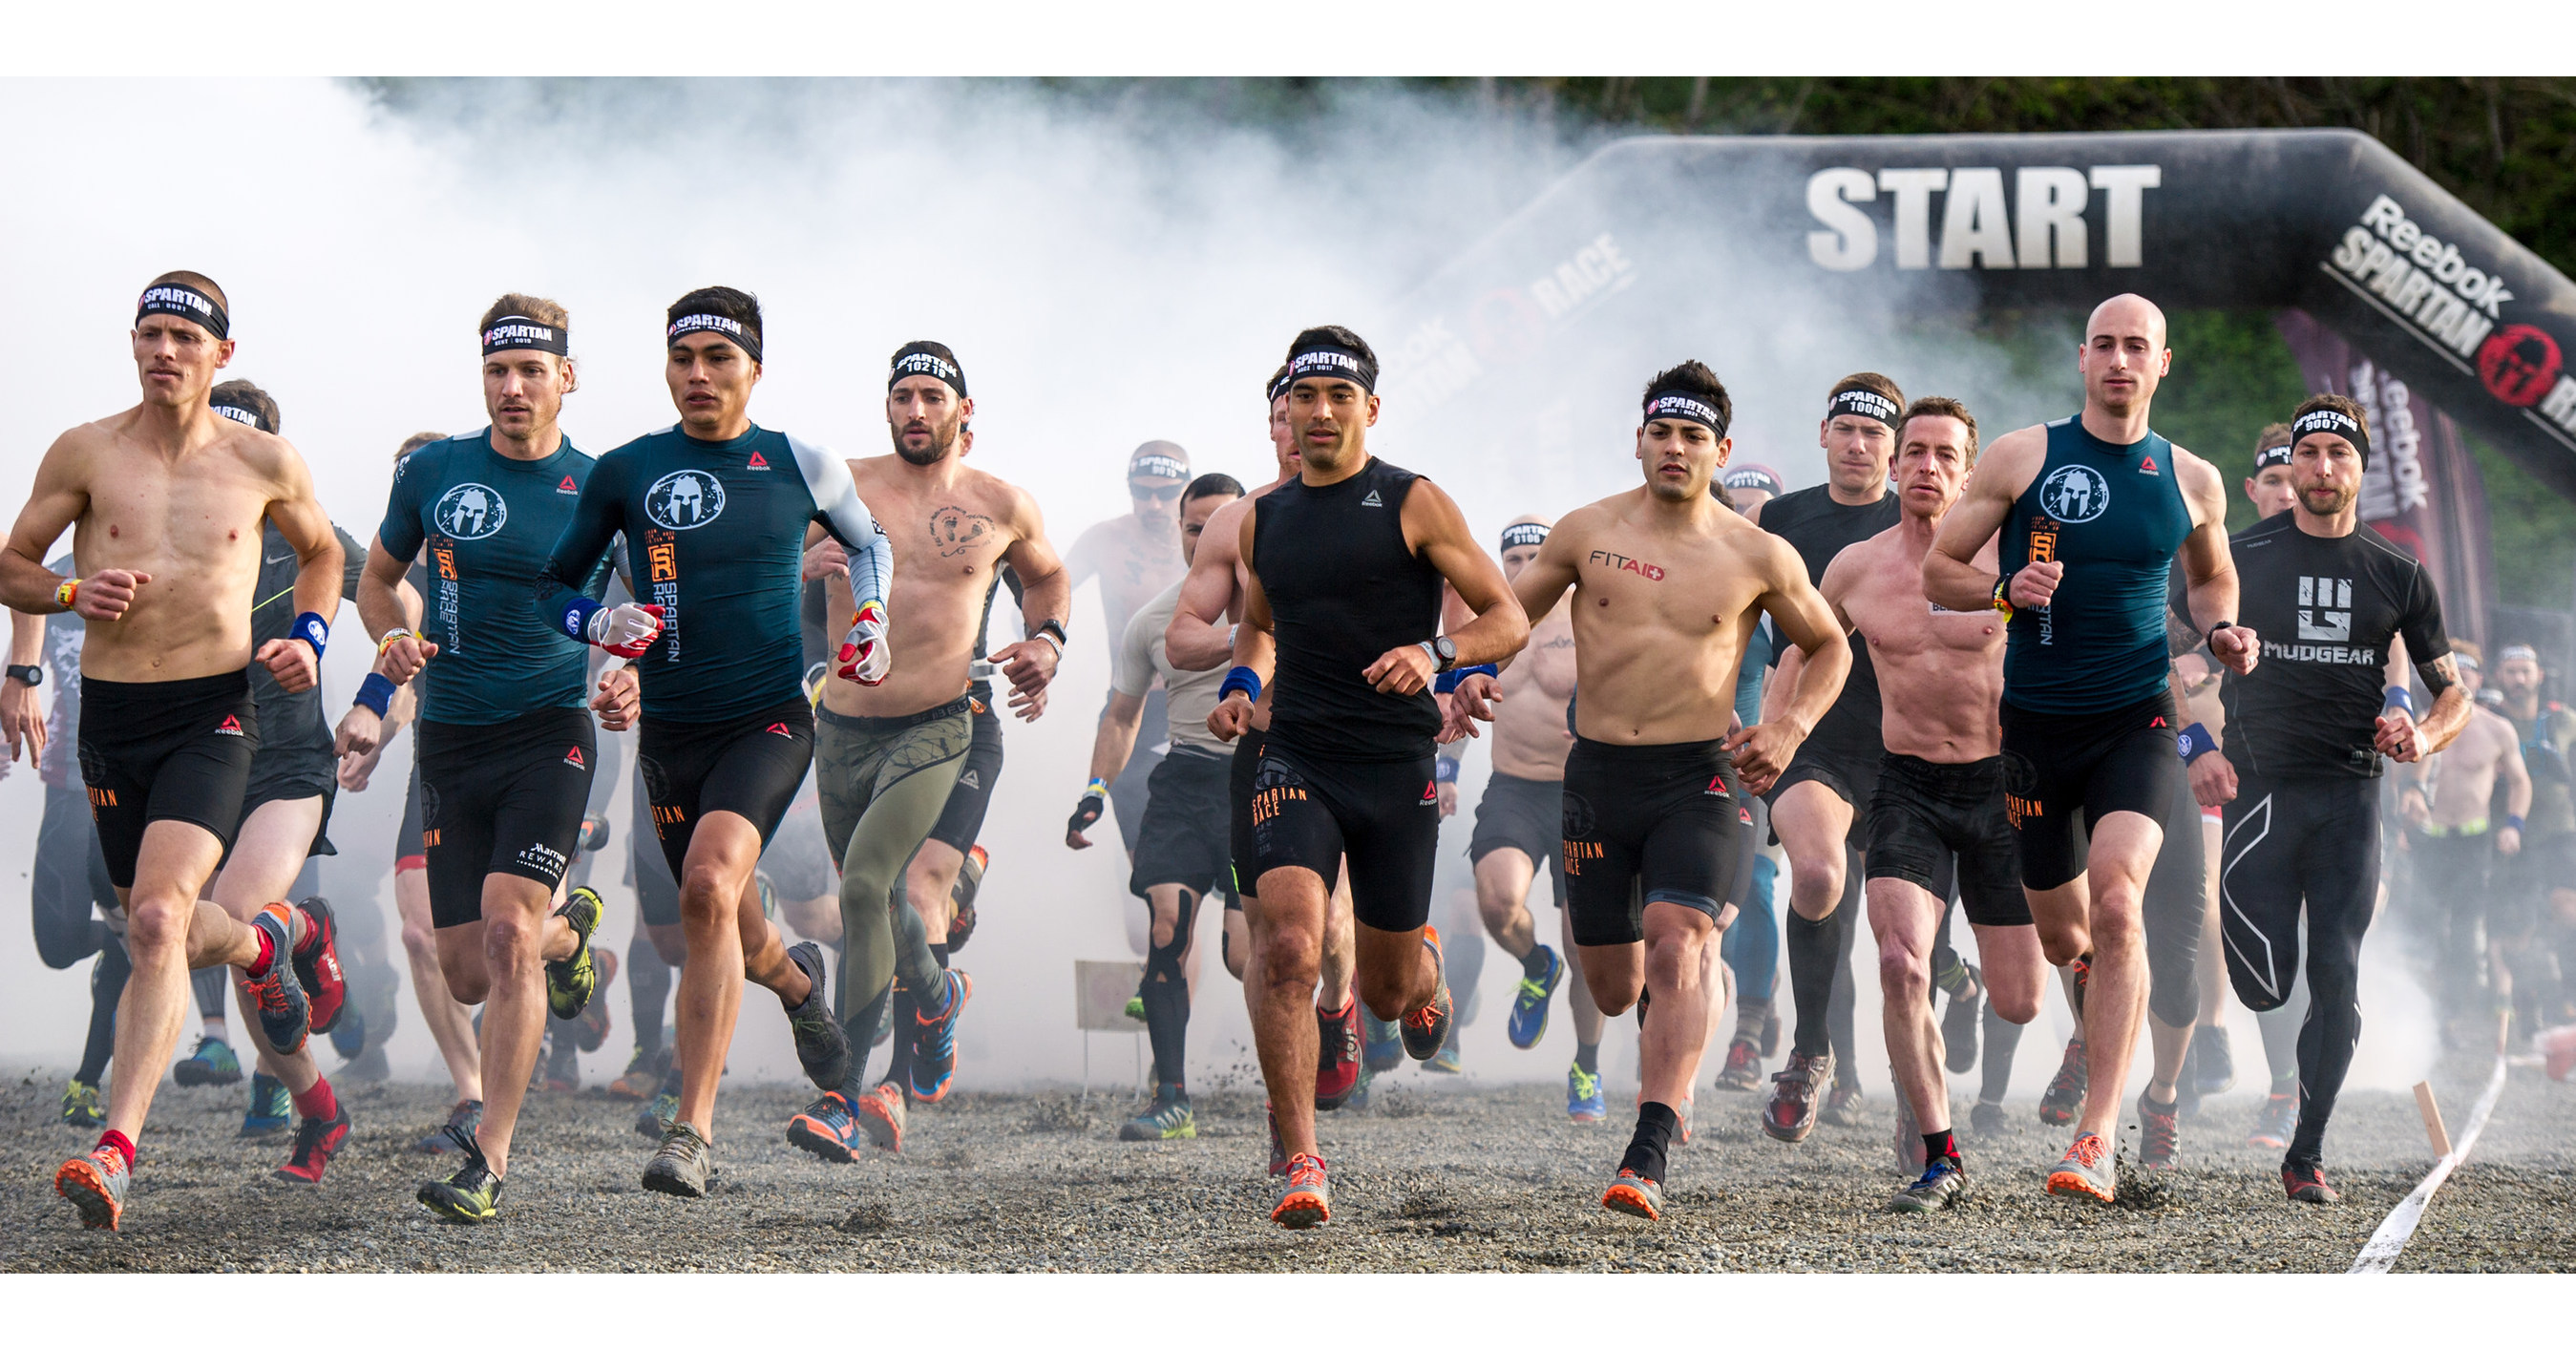 Spartan, the World's Largest Obstacle Race and Endurance Brand, to Bring Live to Facebook's Platform